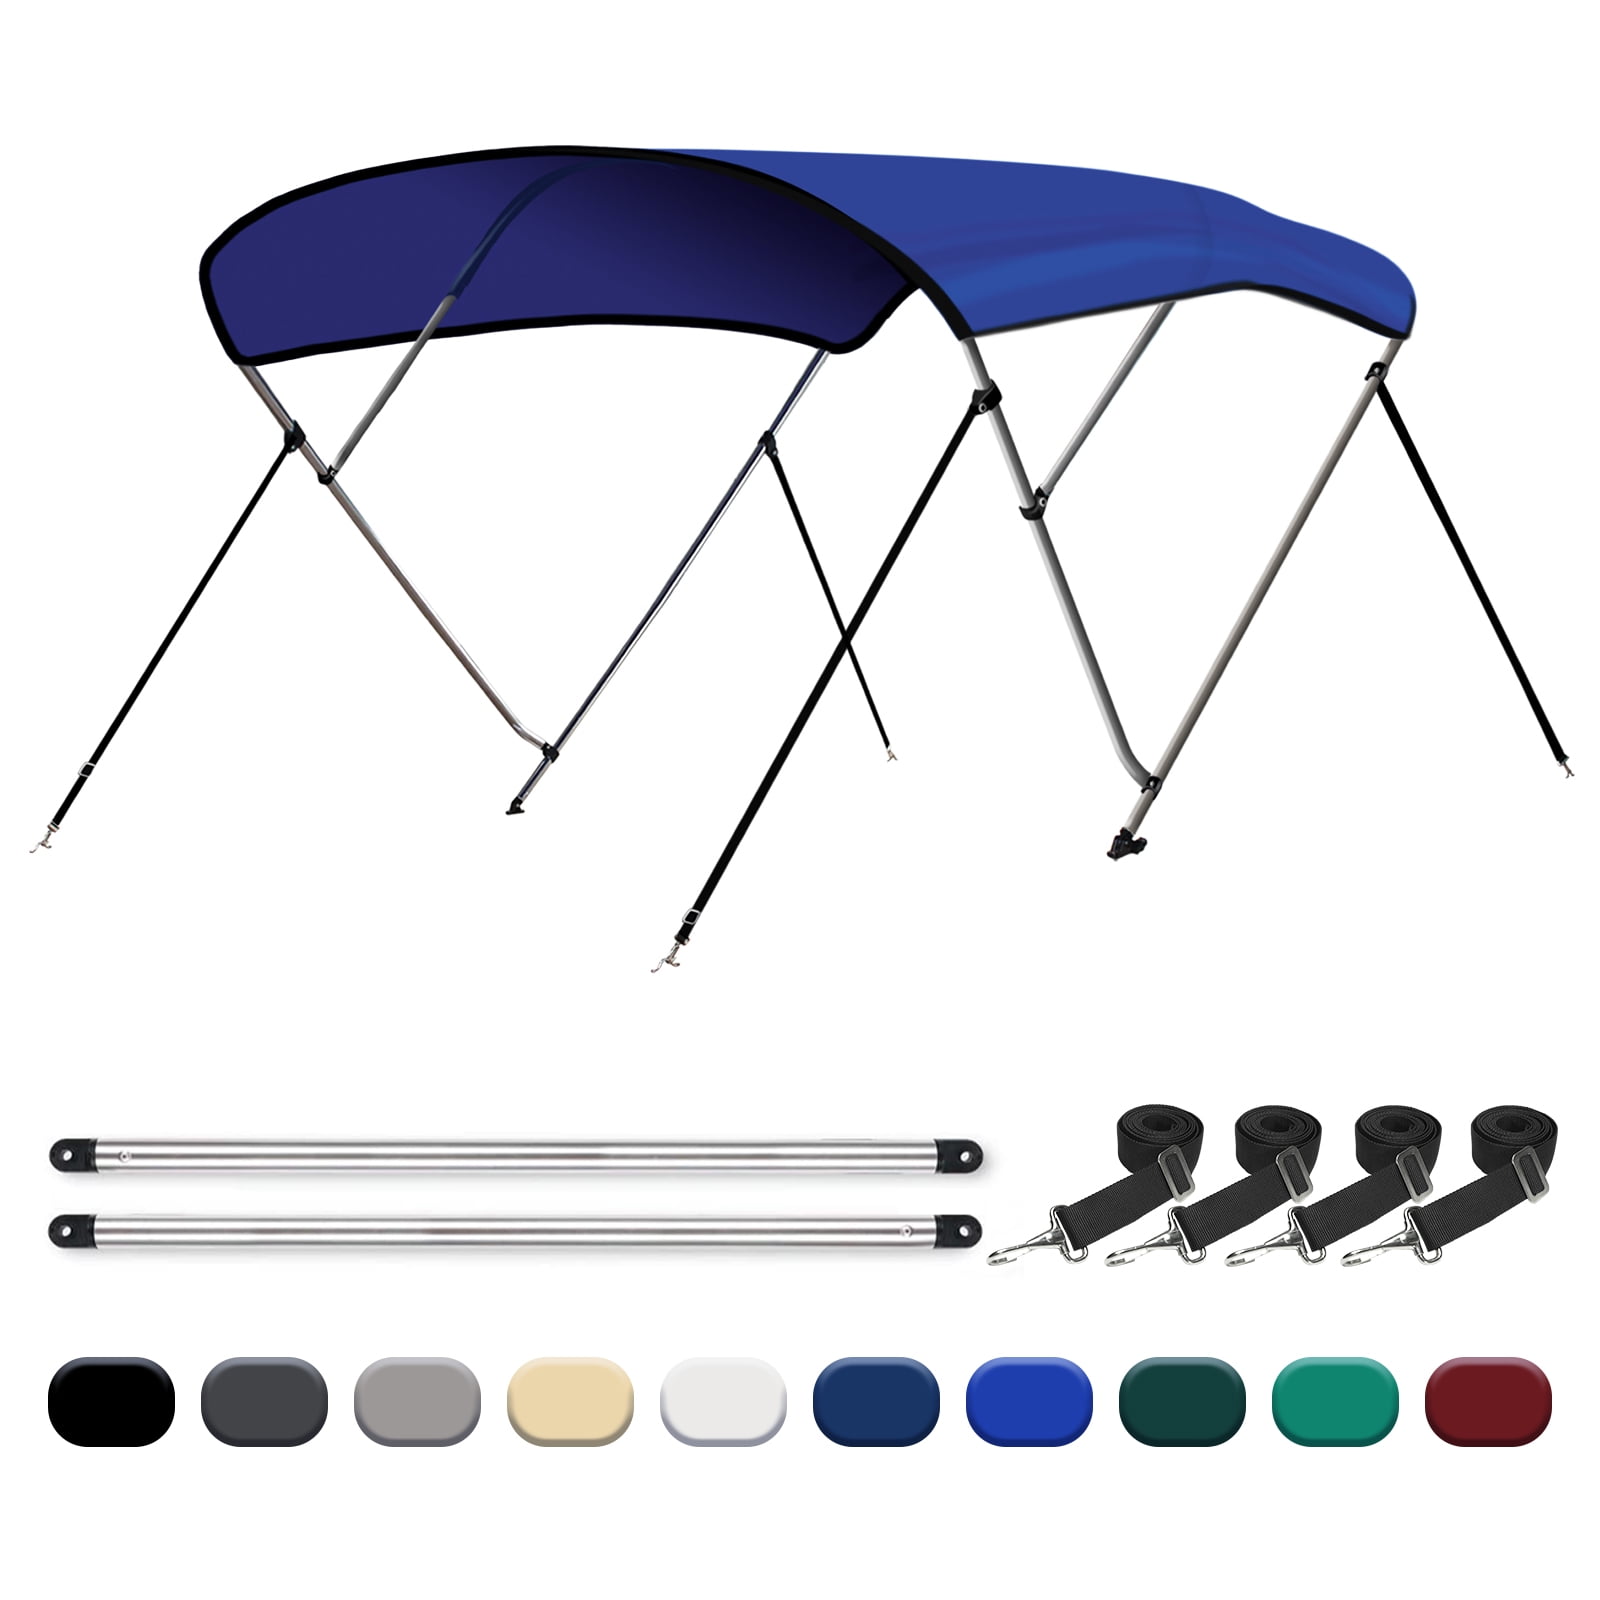 Leader Accessories 3 Bow Bimini Top Boat Cover Includes Mounting